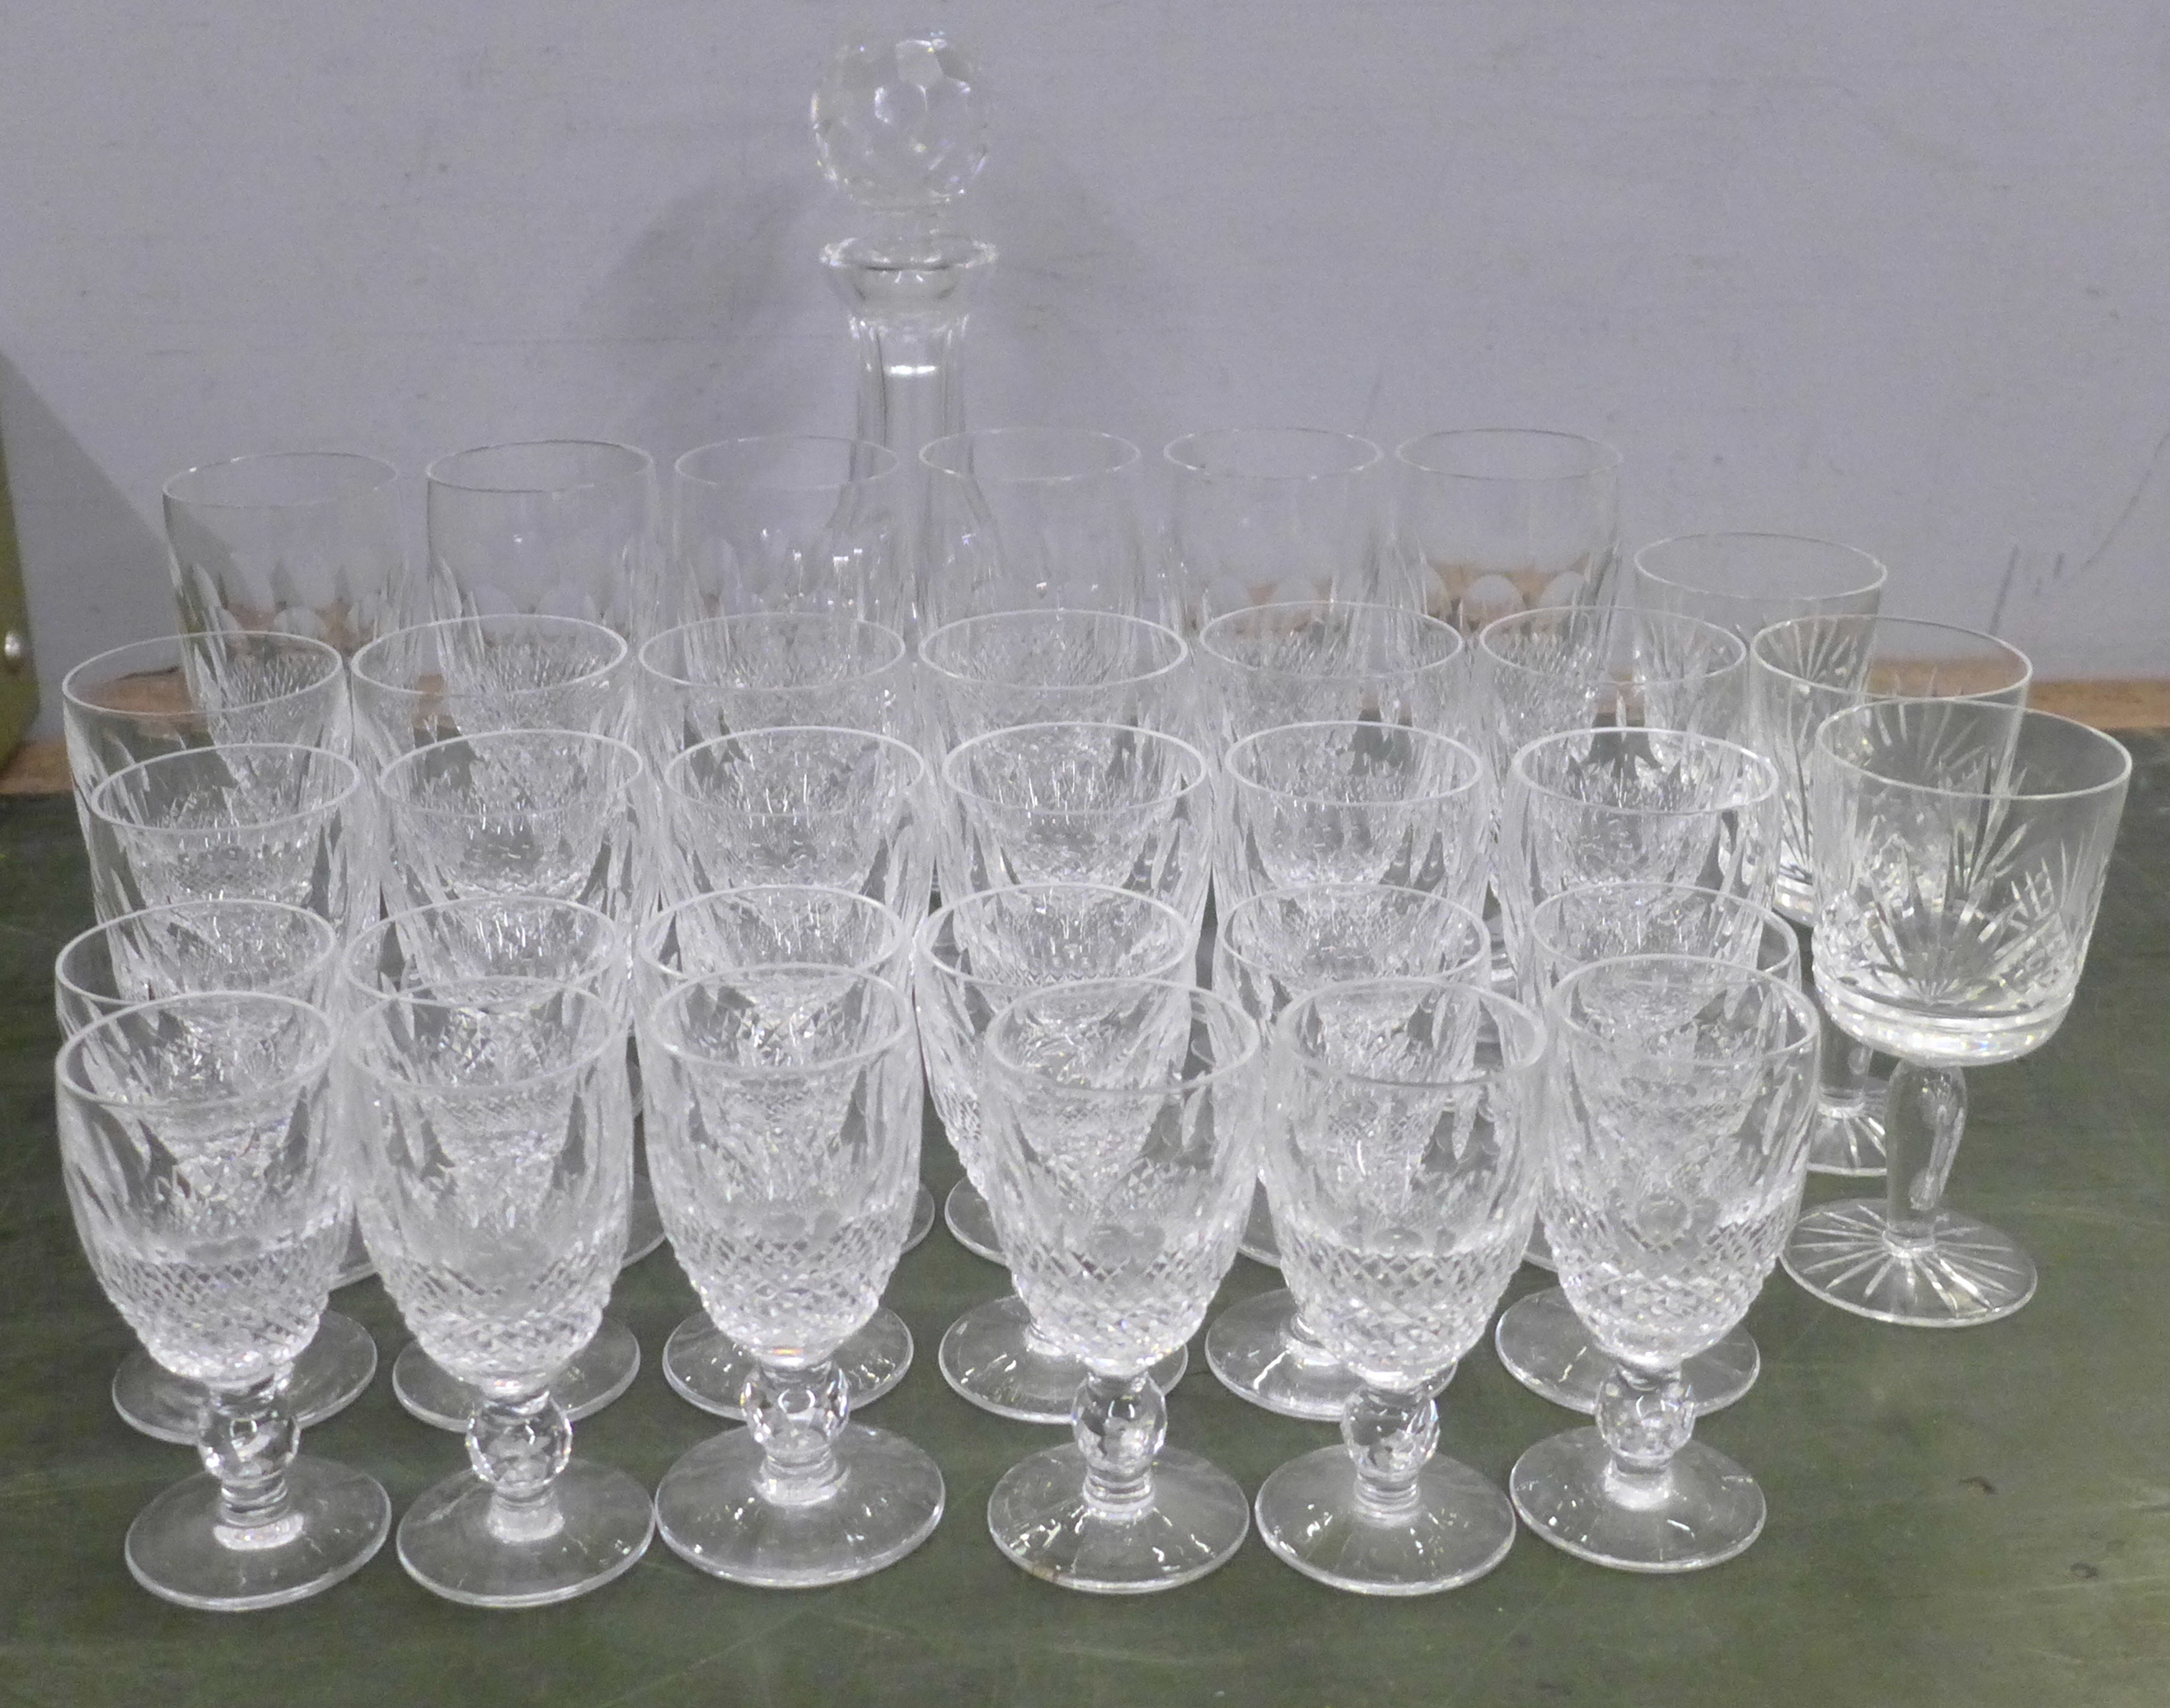 A set of Waterford Crystal drinking glasses; six champagne glasses, six wine glasses, six sherry